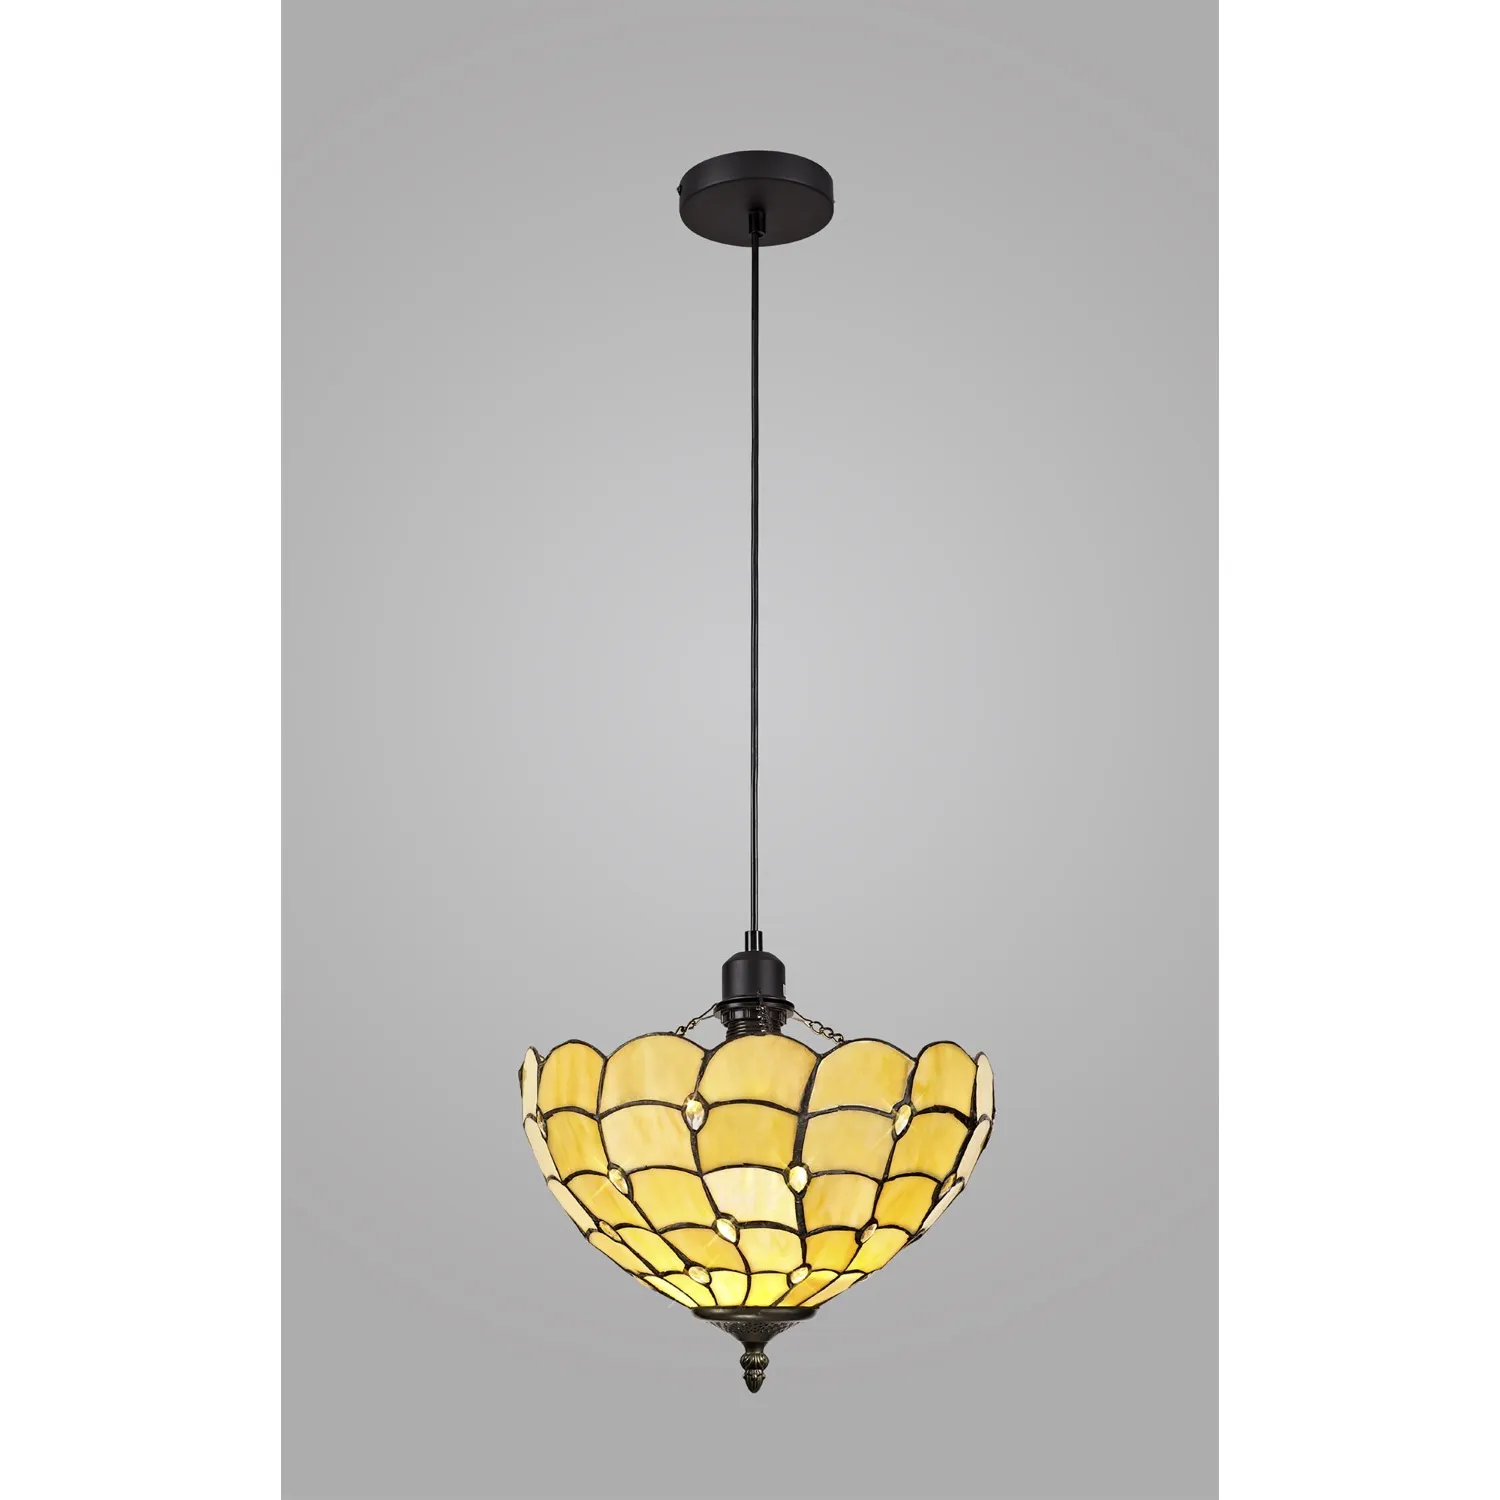 Stratford 1 Light Uplighter Pendant E27 With 30cm Tiffany Shade, Beige Clear Crystal Black